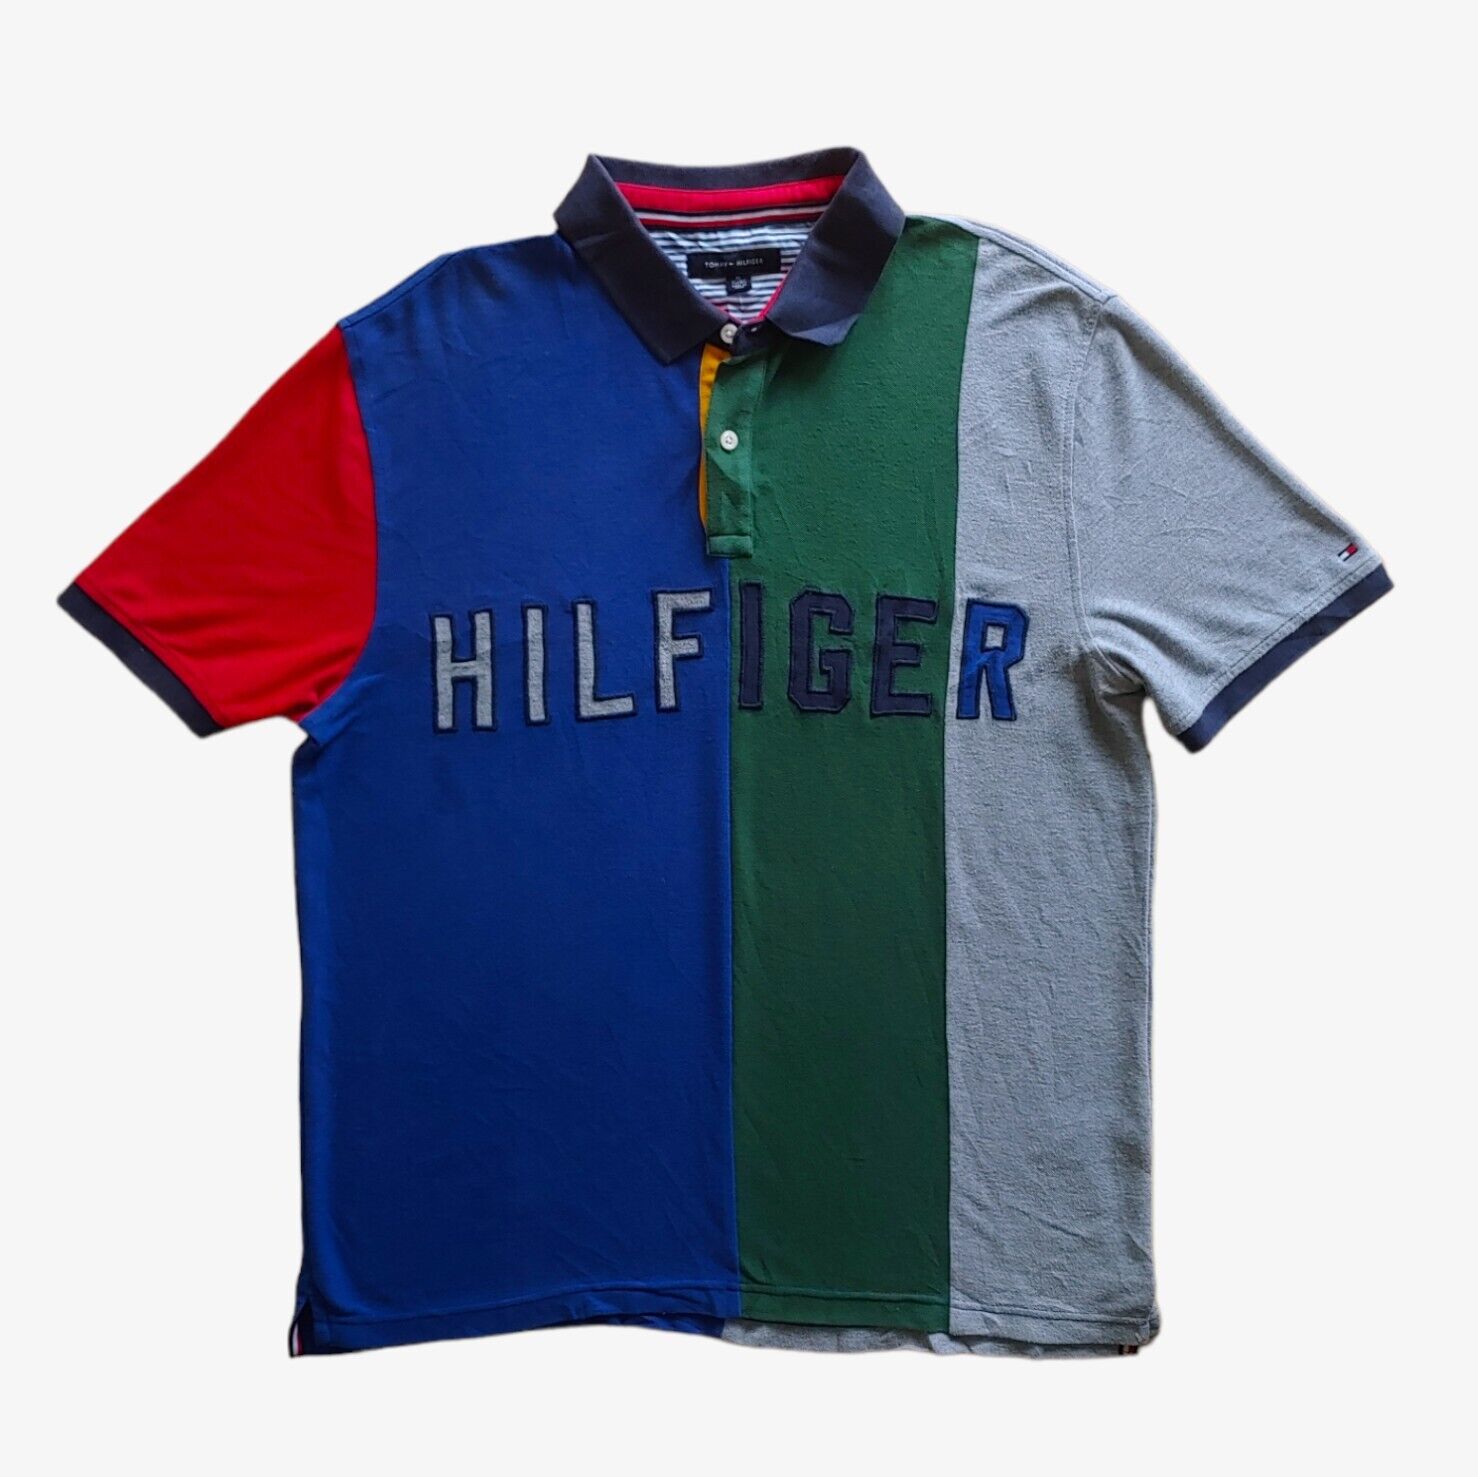 Vintage 1990s Tommy Hilfiger Colour Block Striped Polo With Chest Spell Out Logo - Casspios Dream